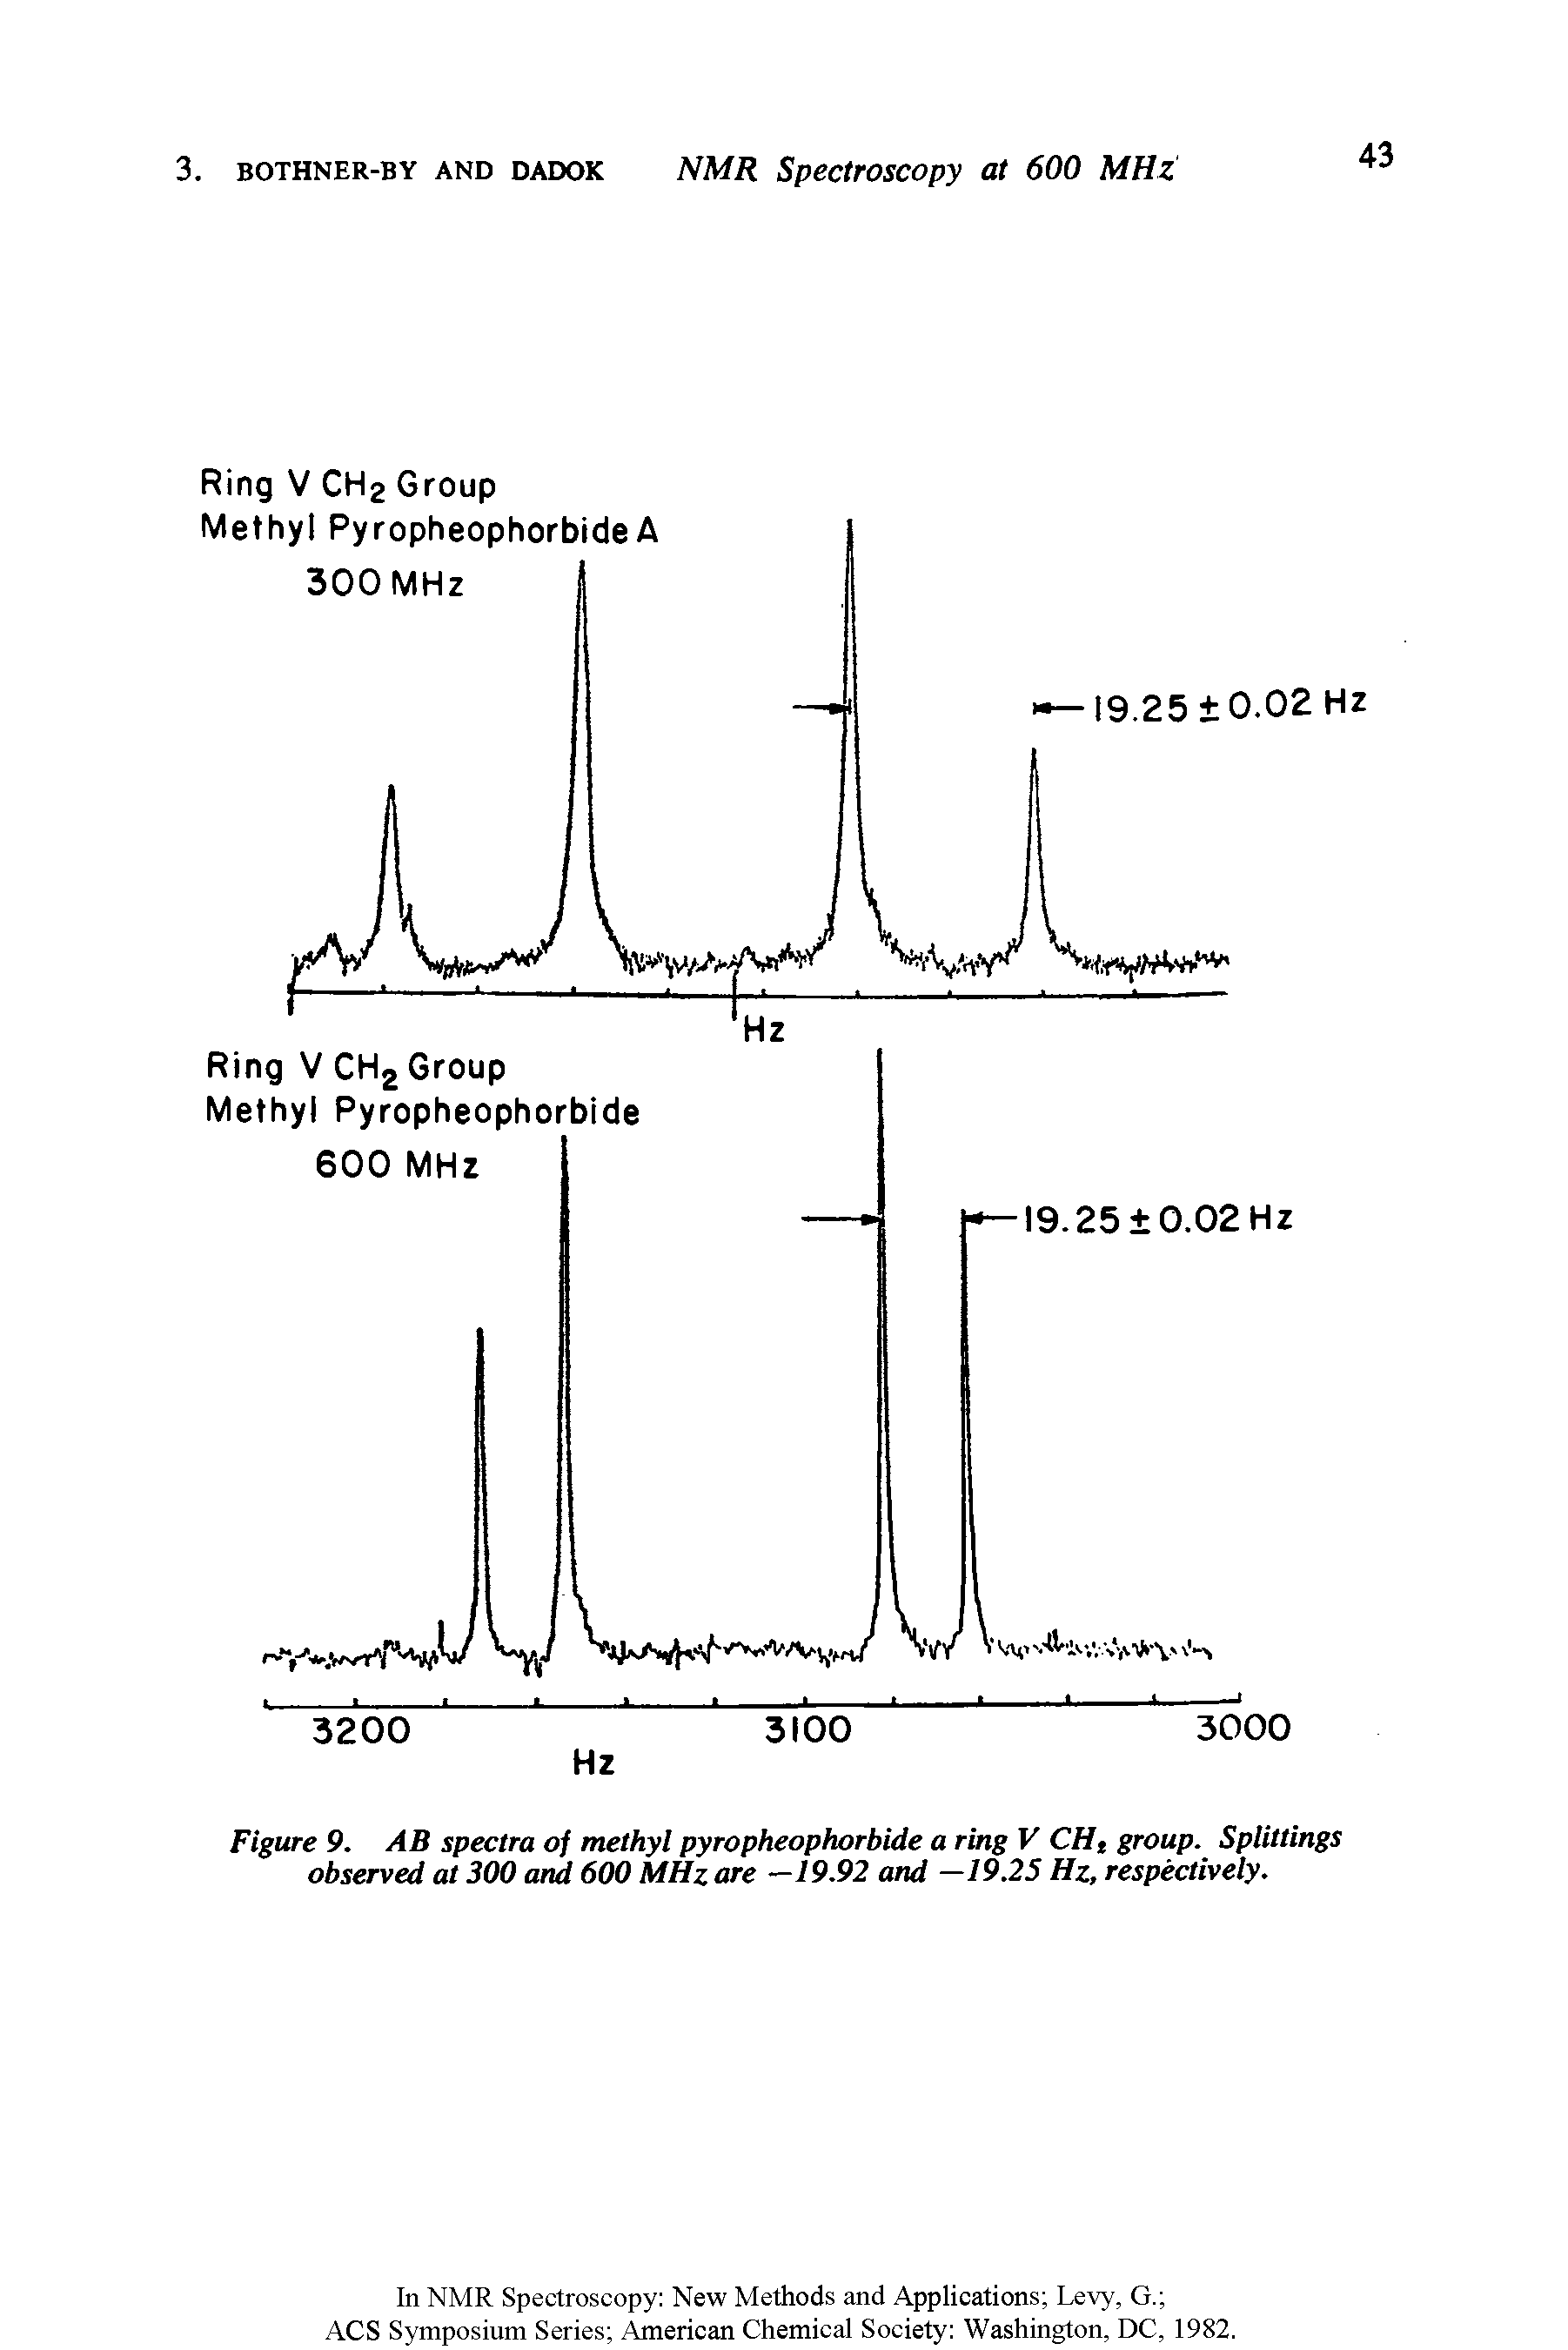 Figure 9. AB spectra of methyl pyropheophorbide a ring V CHt group. Splittings observed at 300 and 600 MHz are —19.92 and —19.25 Hz, respectively.